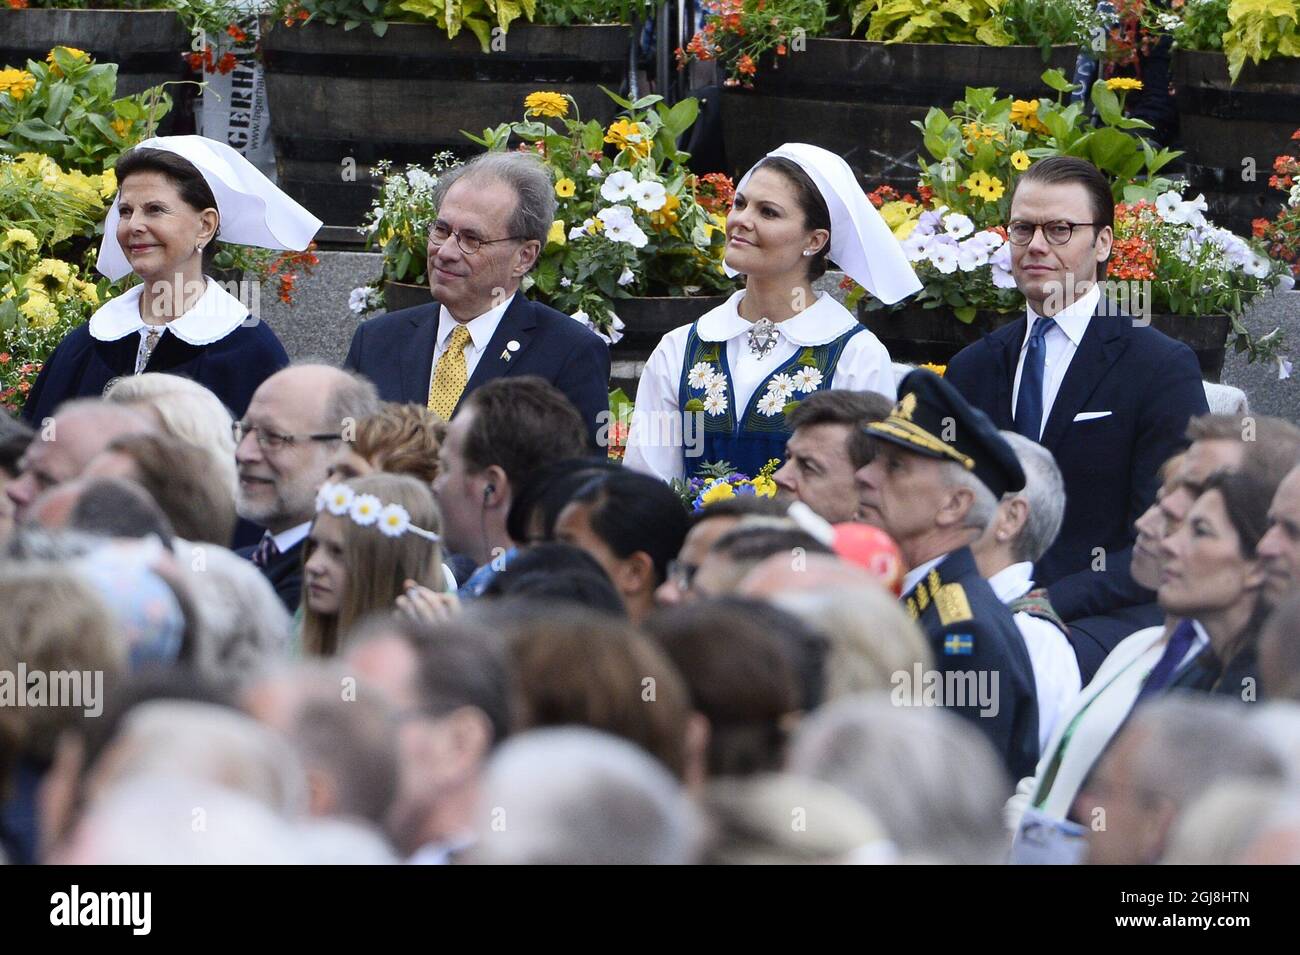 STOCKHOLM 2014-06-06 Queen Silvia, speaker of the parliament Per Westerberg, Crown Princess Victoria and Prince Daniel during the Swedish National Day celebrations at the Skansen open-air museum in Stockholm, Sweden, June 6, 2014. Photo: Claudio Bresciani / TT / Code 10090 Stock Photo